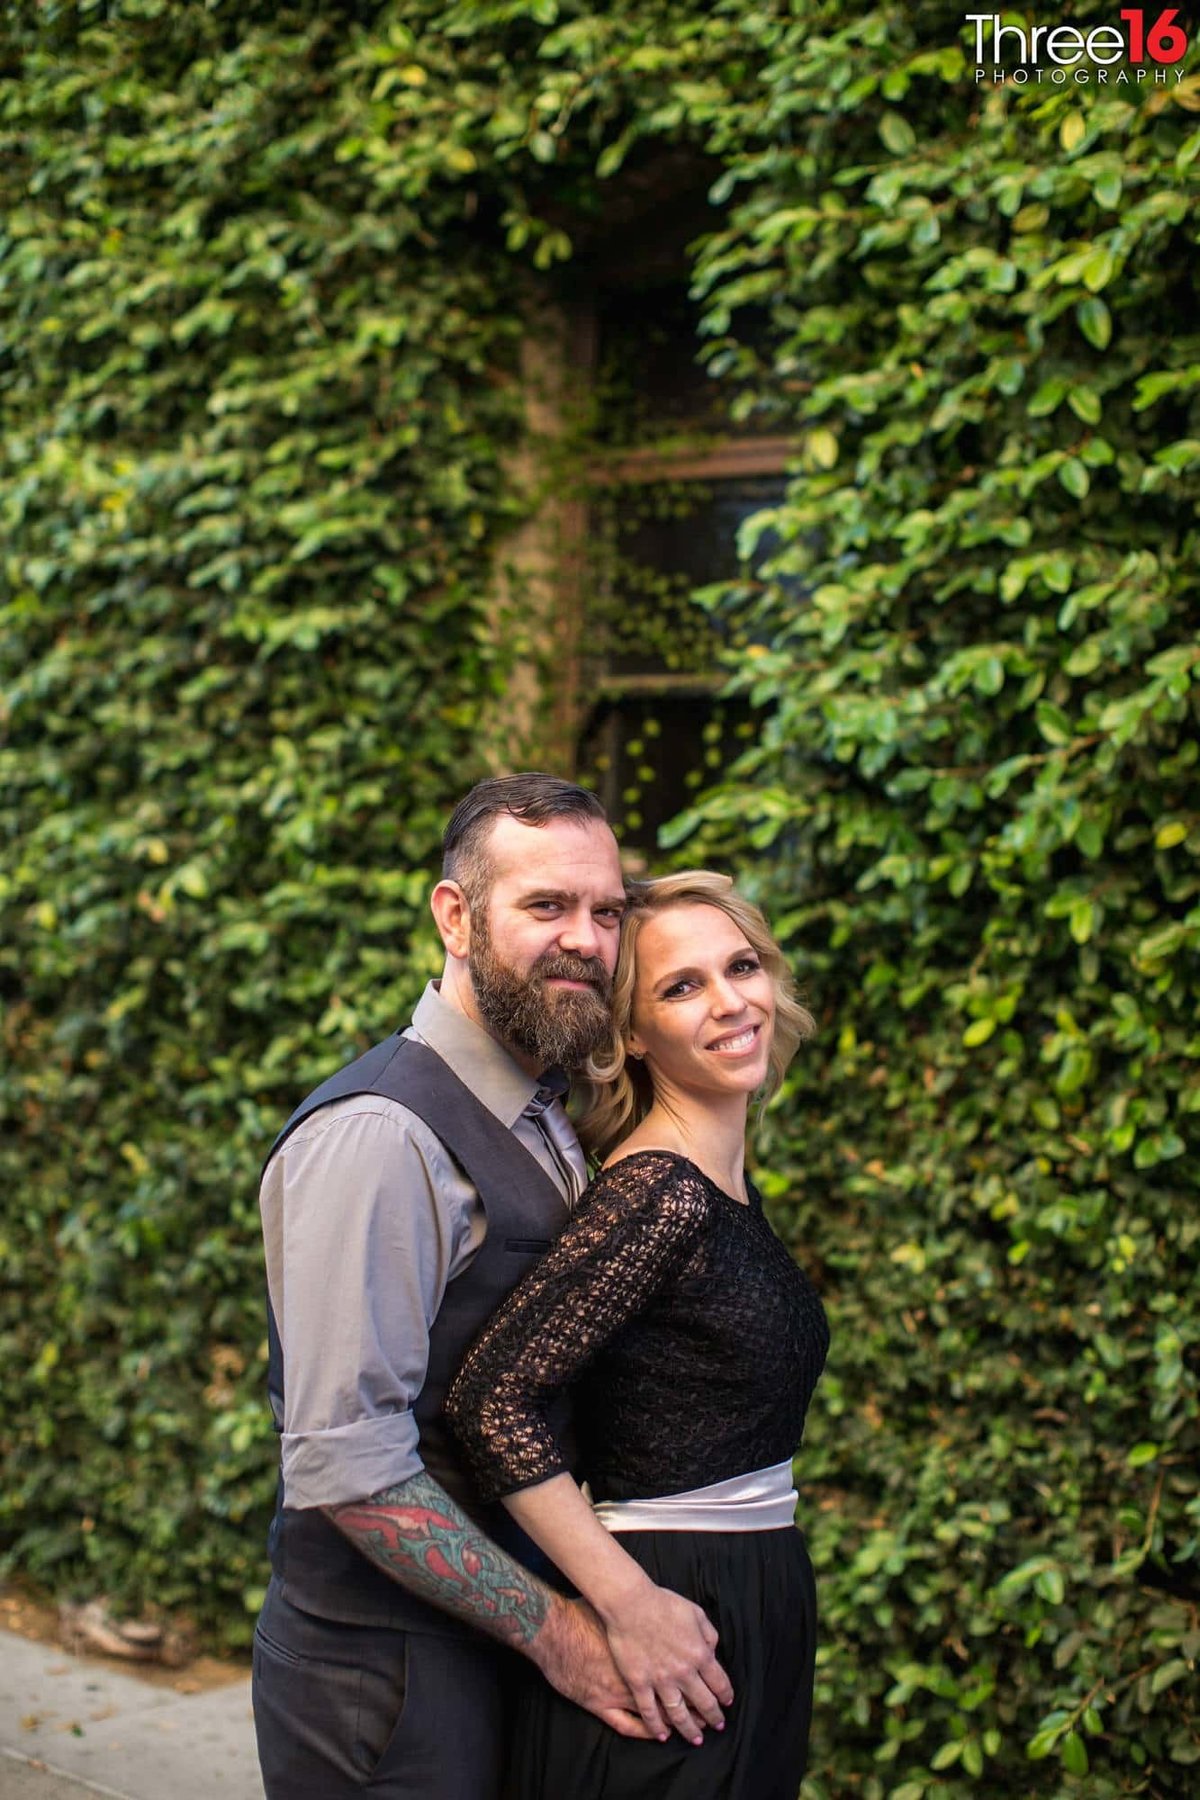 Groom to be snuggles up to his Bride from behind in front of ivy covered wall